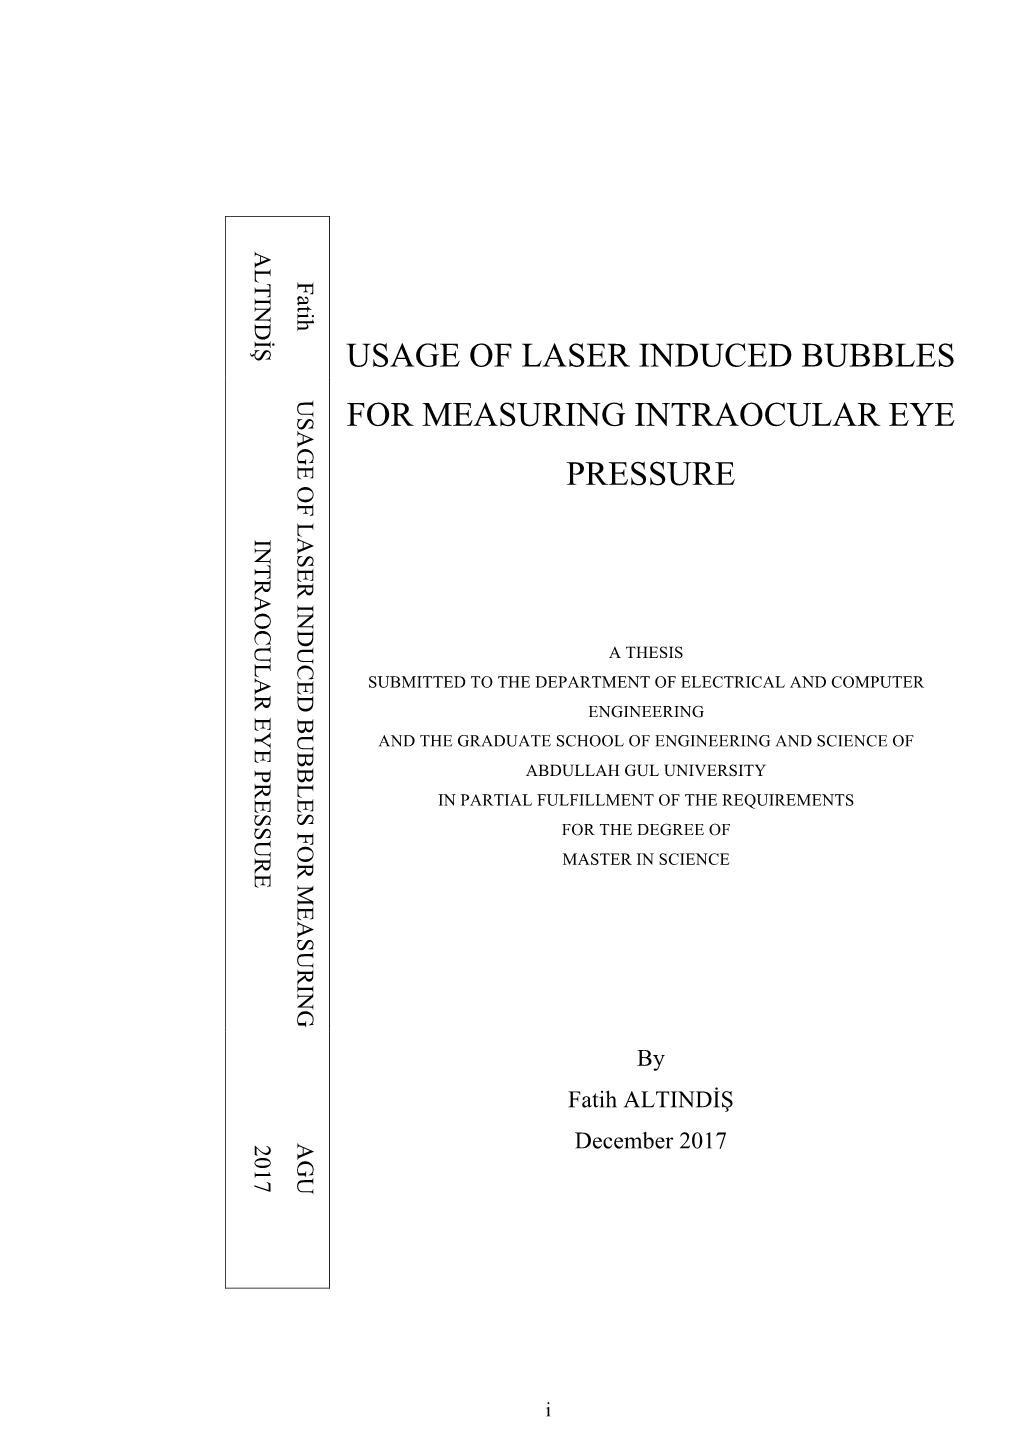 Usage of Laser Induced Bubbles for Measuring Intraocular Eye Pressure